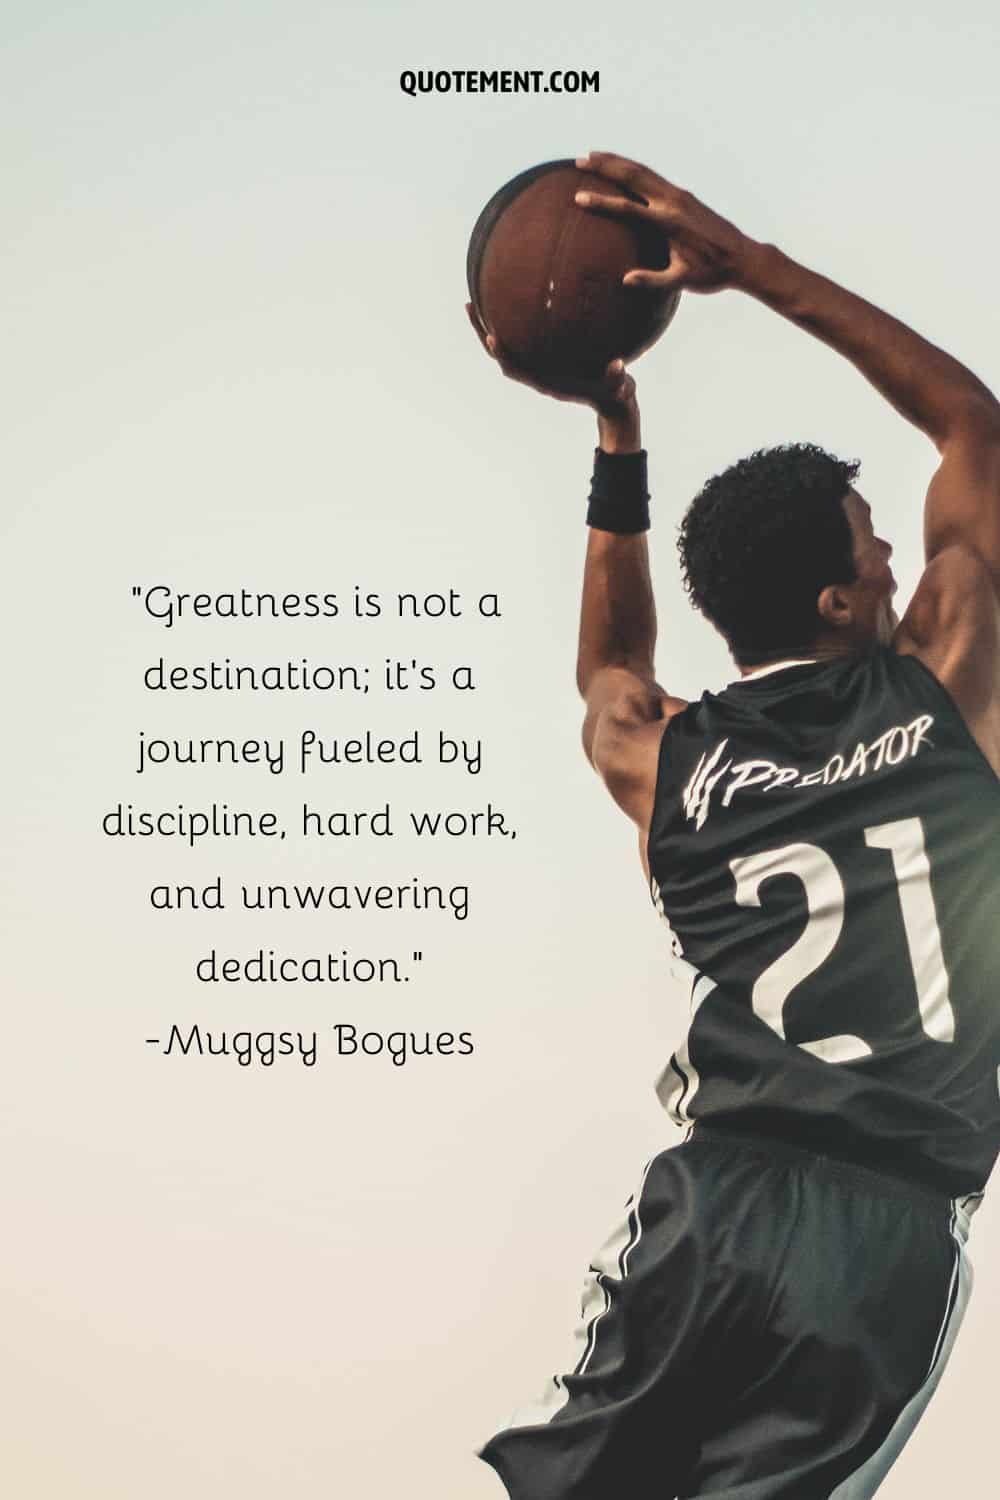 Greatness is not a destination; it's a journey fueled by discipline, hard work, and unwavering dedication